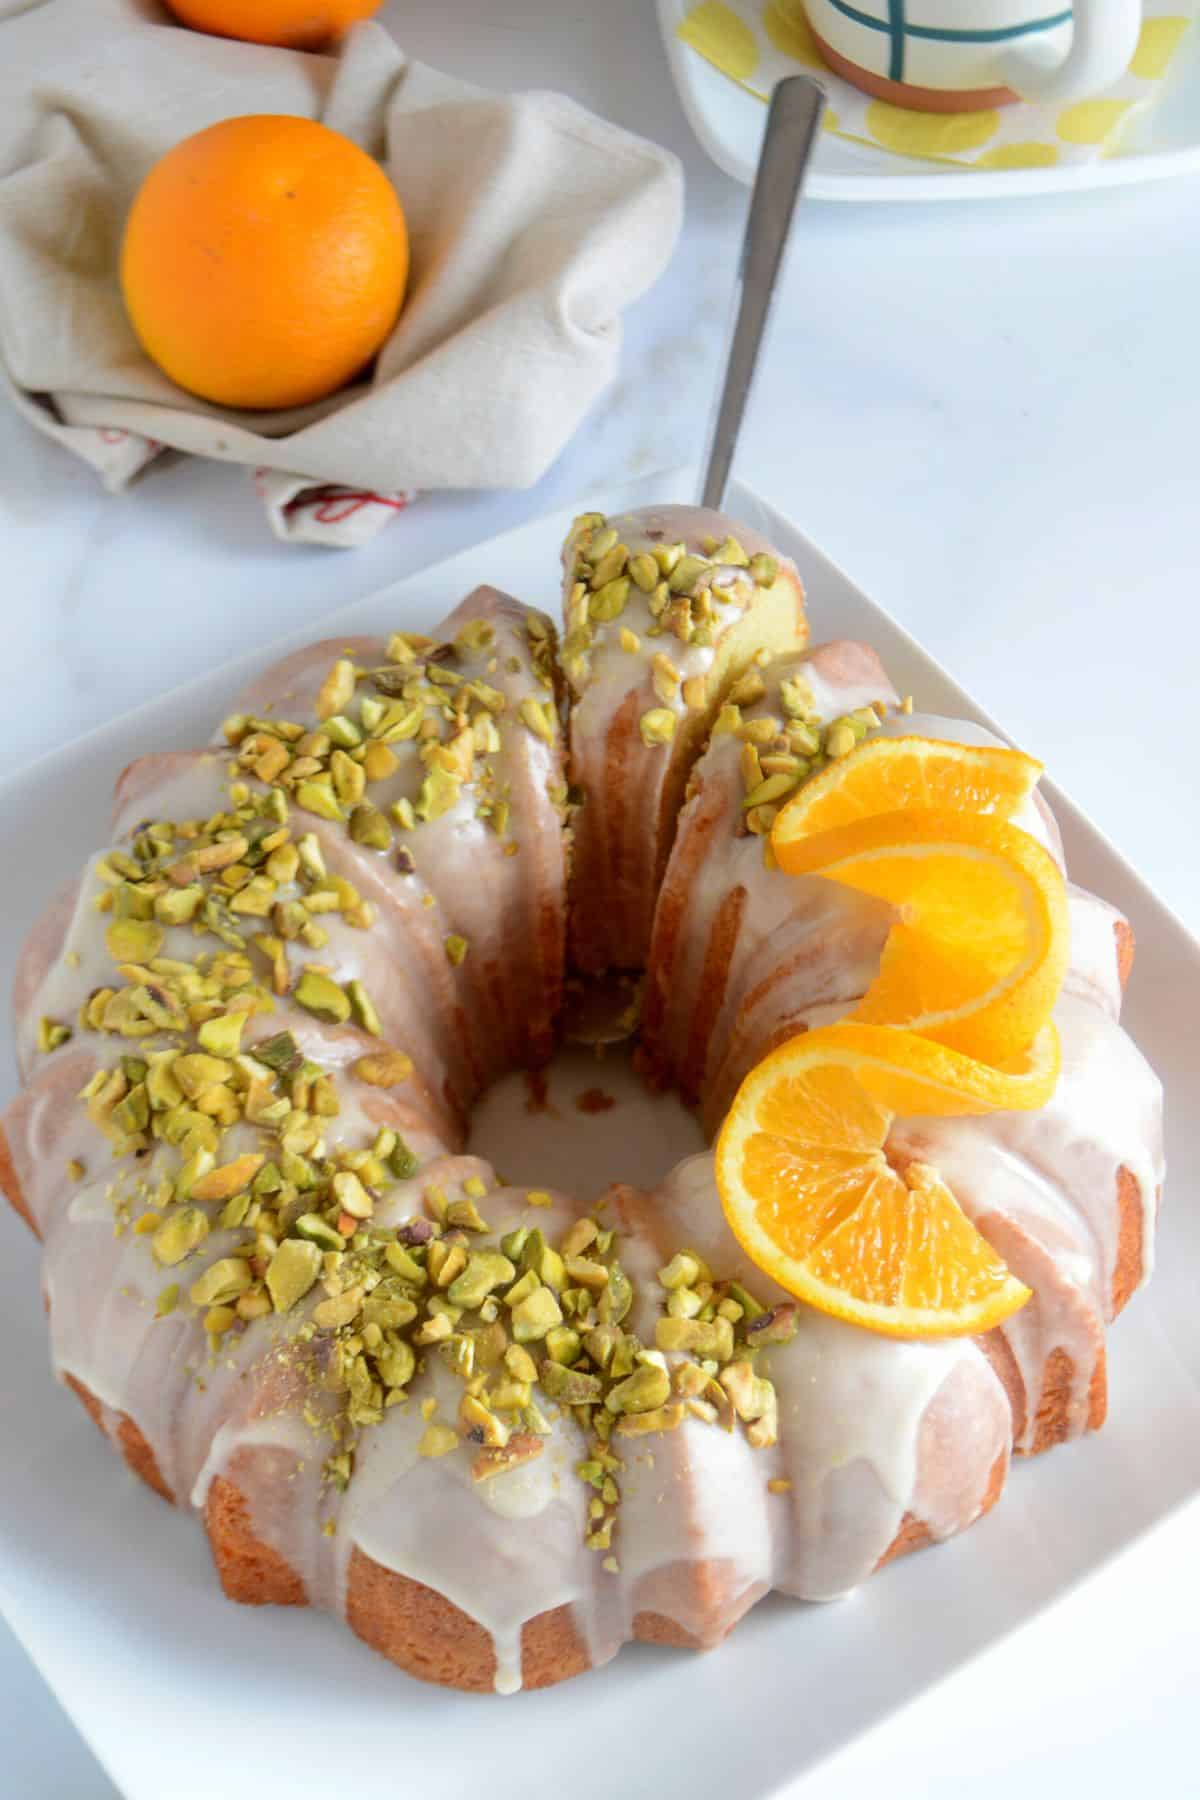 Orange bundt cake on a white platter with a piece cut from it.